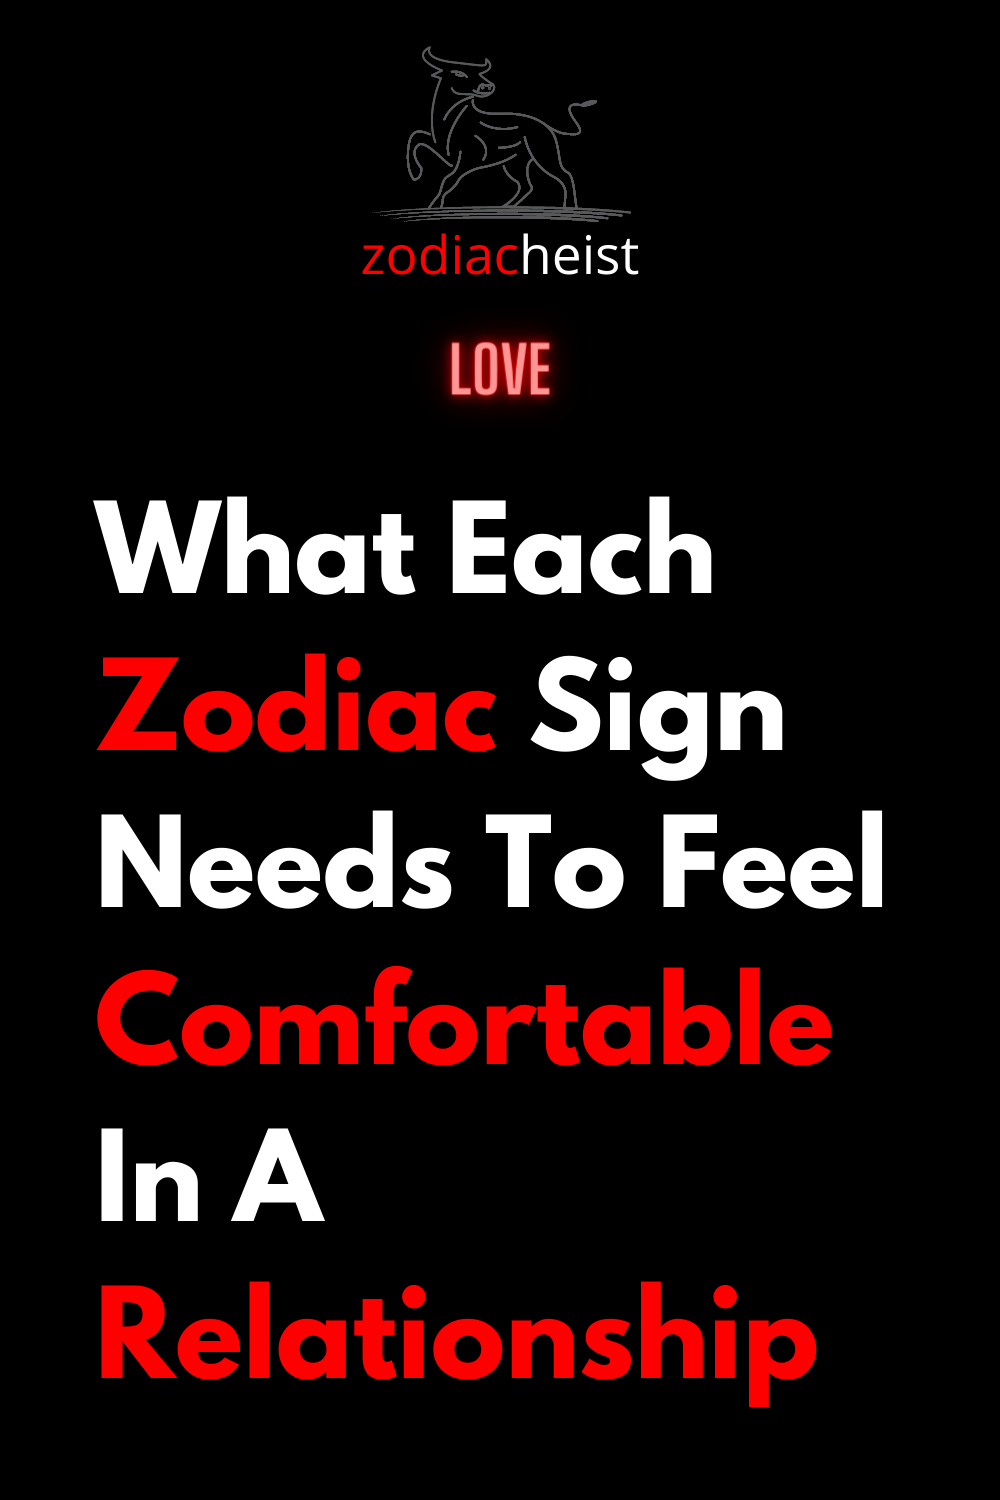 What Each Zodiac Sign Needs To Feel Comfortable In A Relationship